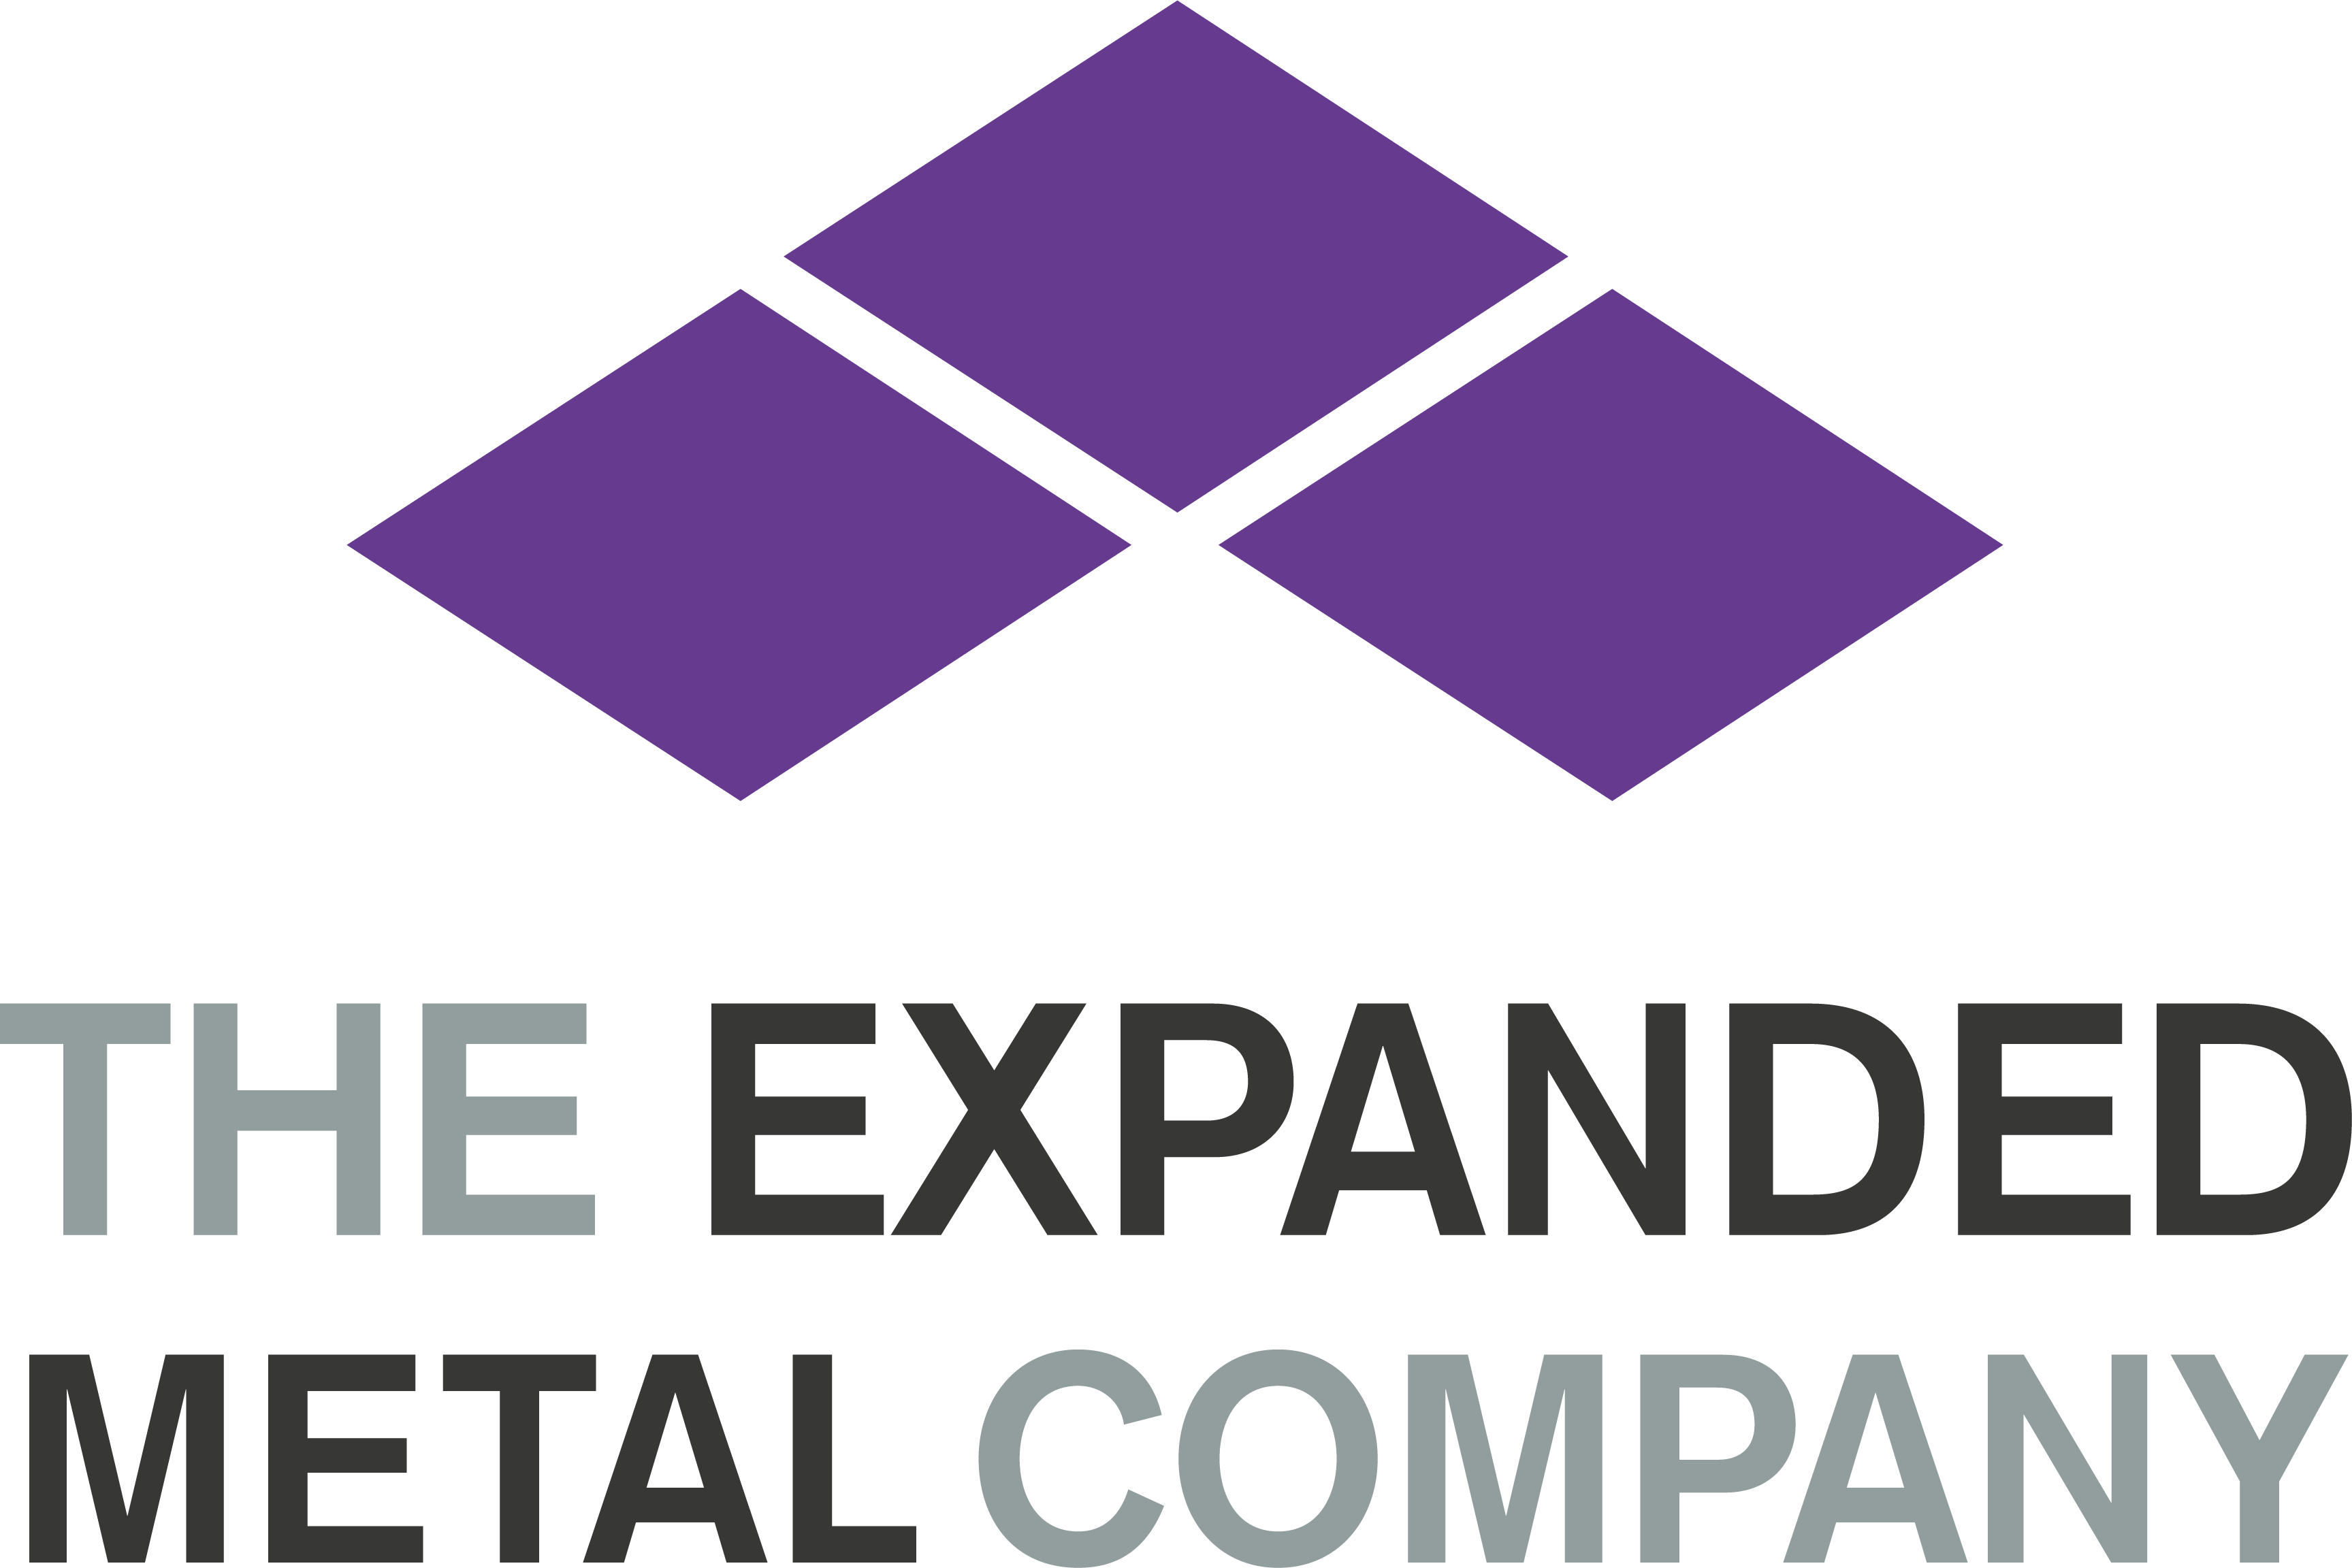 The Expanded Metal Company